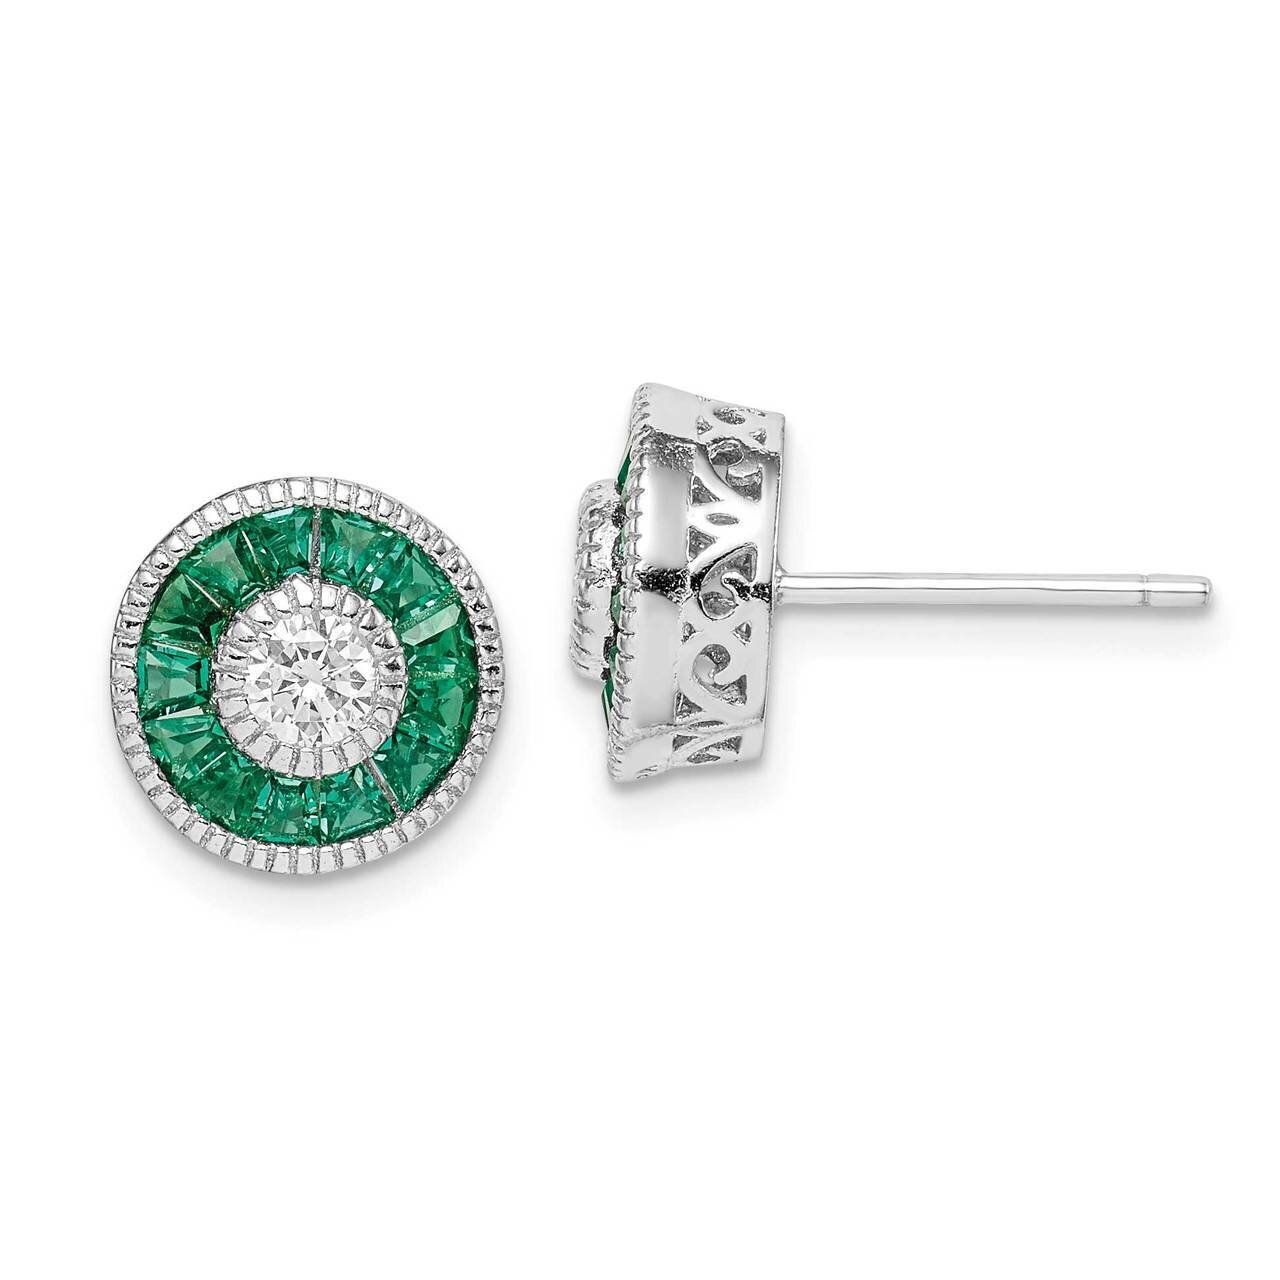 Synthetic Green Spinel Earrings Sterling Silver Rhodium-plated CZ Diamond QE14266